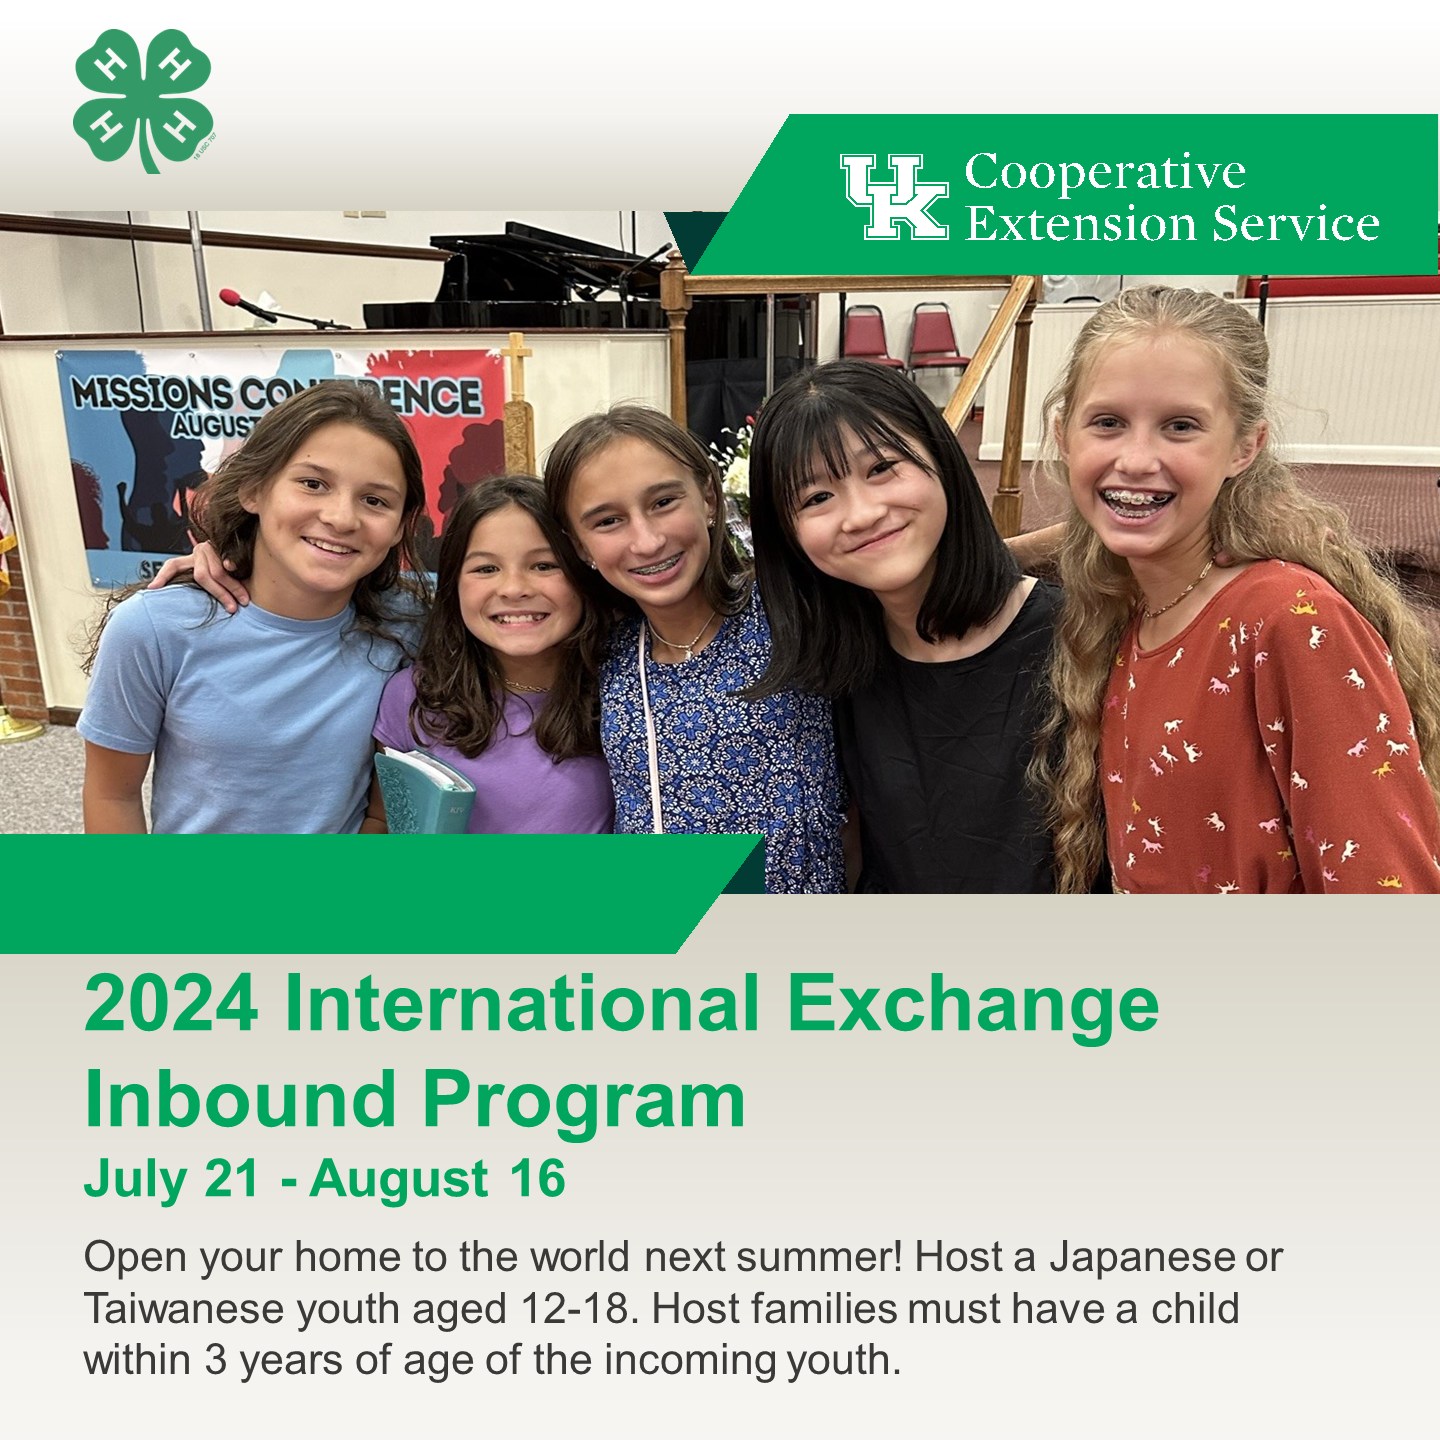 5 young 4-Hers from around the world gather for a photo above text encouraging people to open their homes to host an international exchange student.